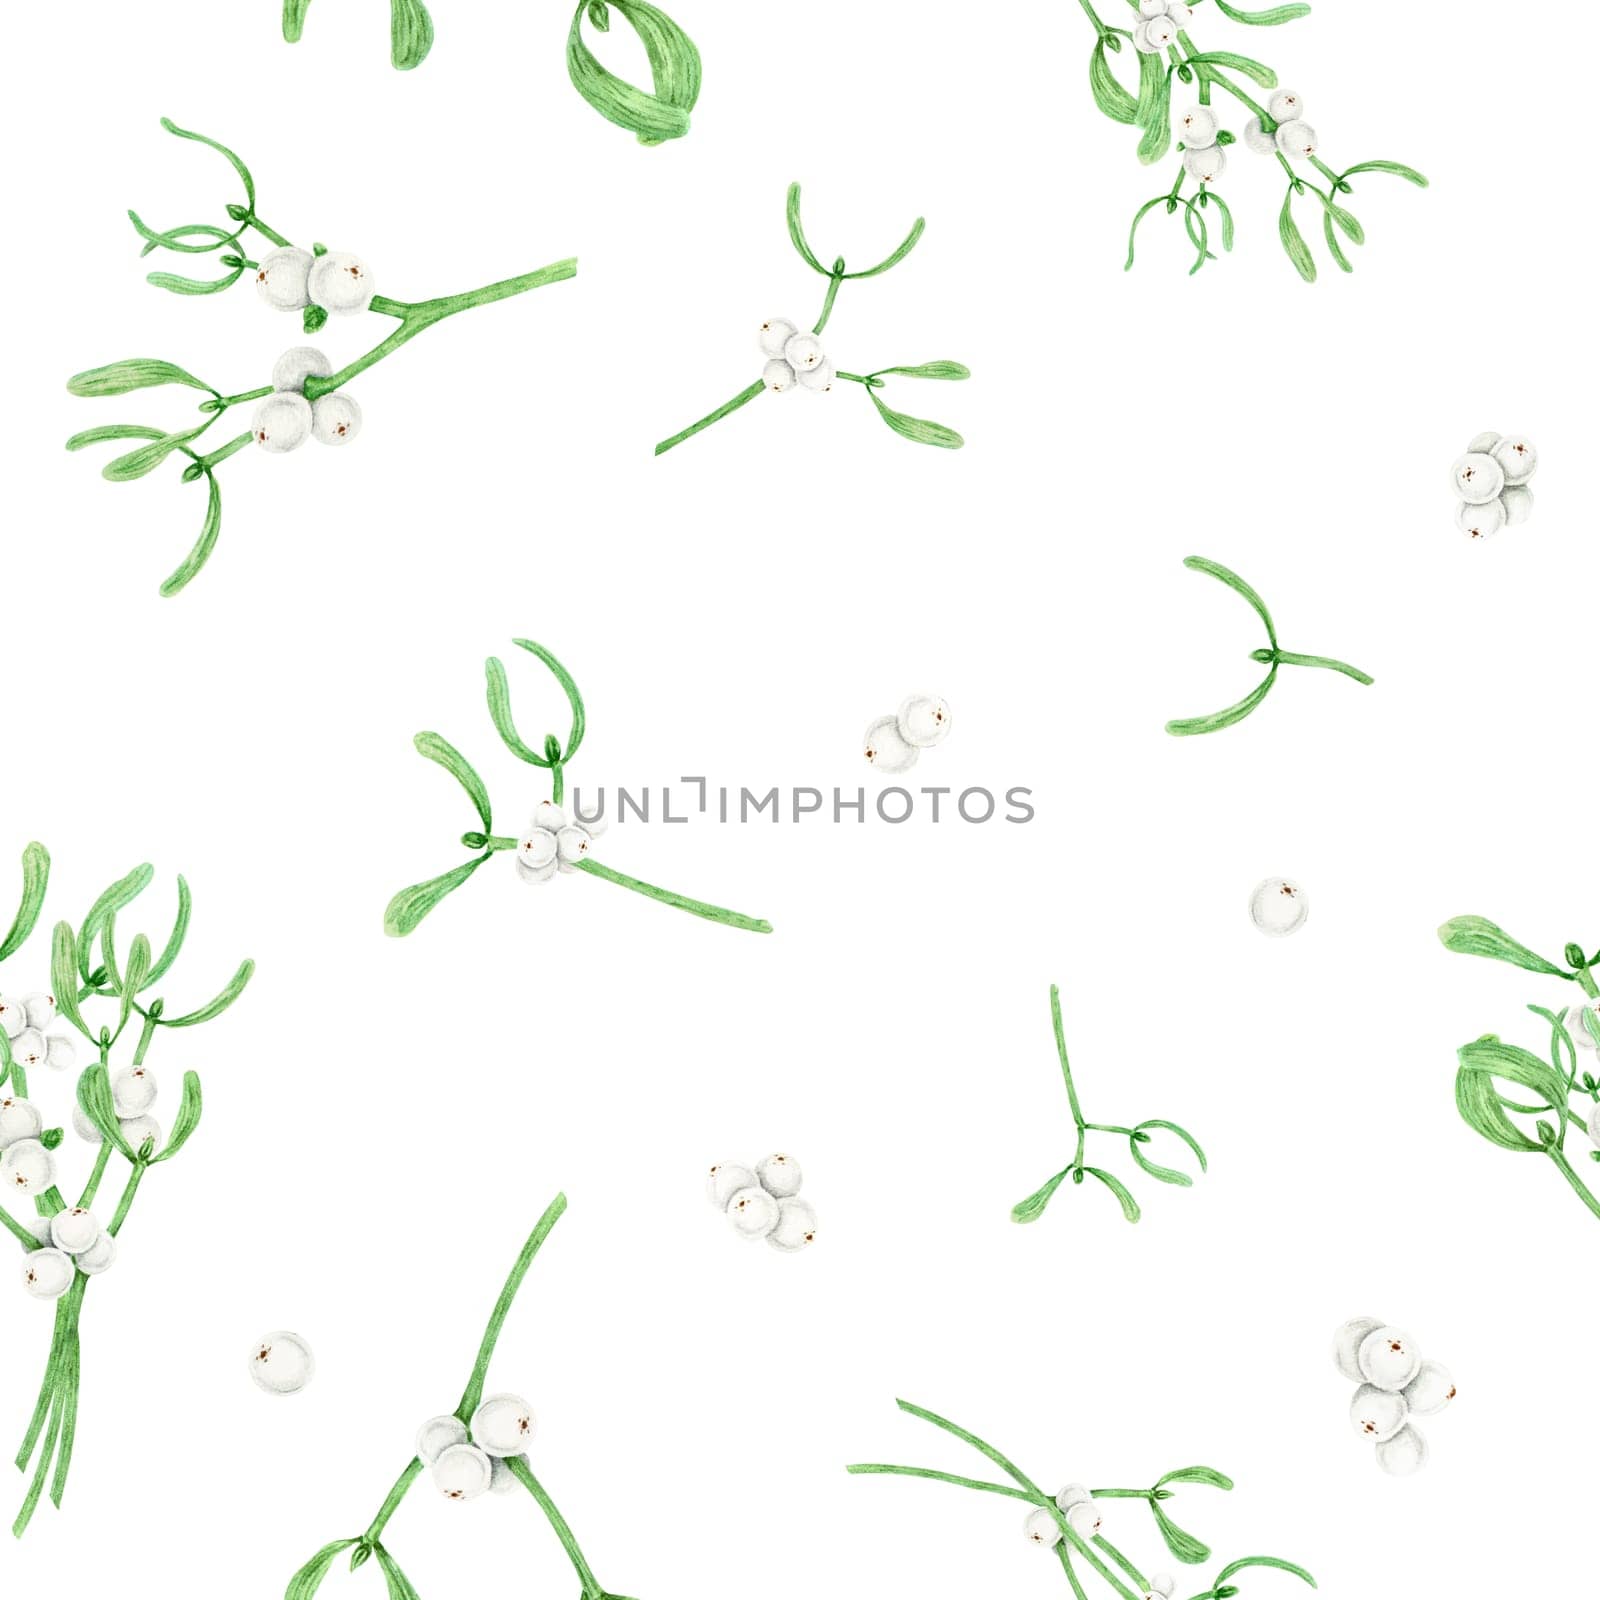 Seamless pattern of Mistletoe evergreen branches, leaves and white berries. Christmas symbol. Watercolor hand drawn botanical background for packing, textile, paper, winter prints, invitations, designs